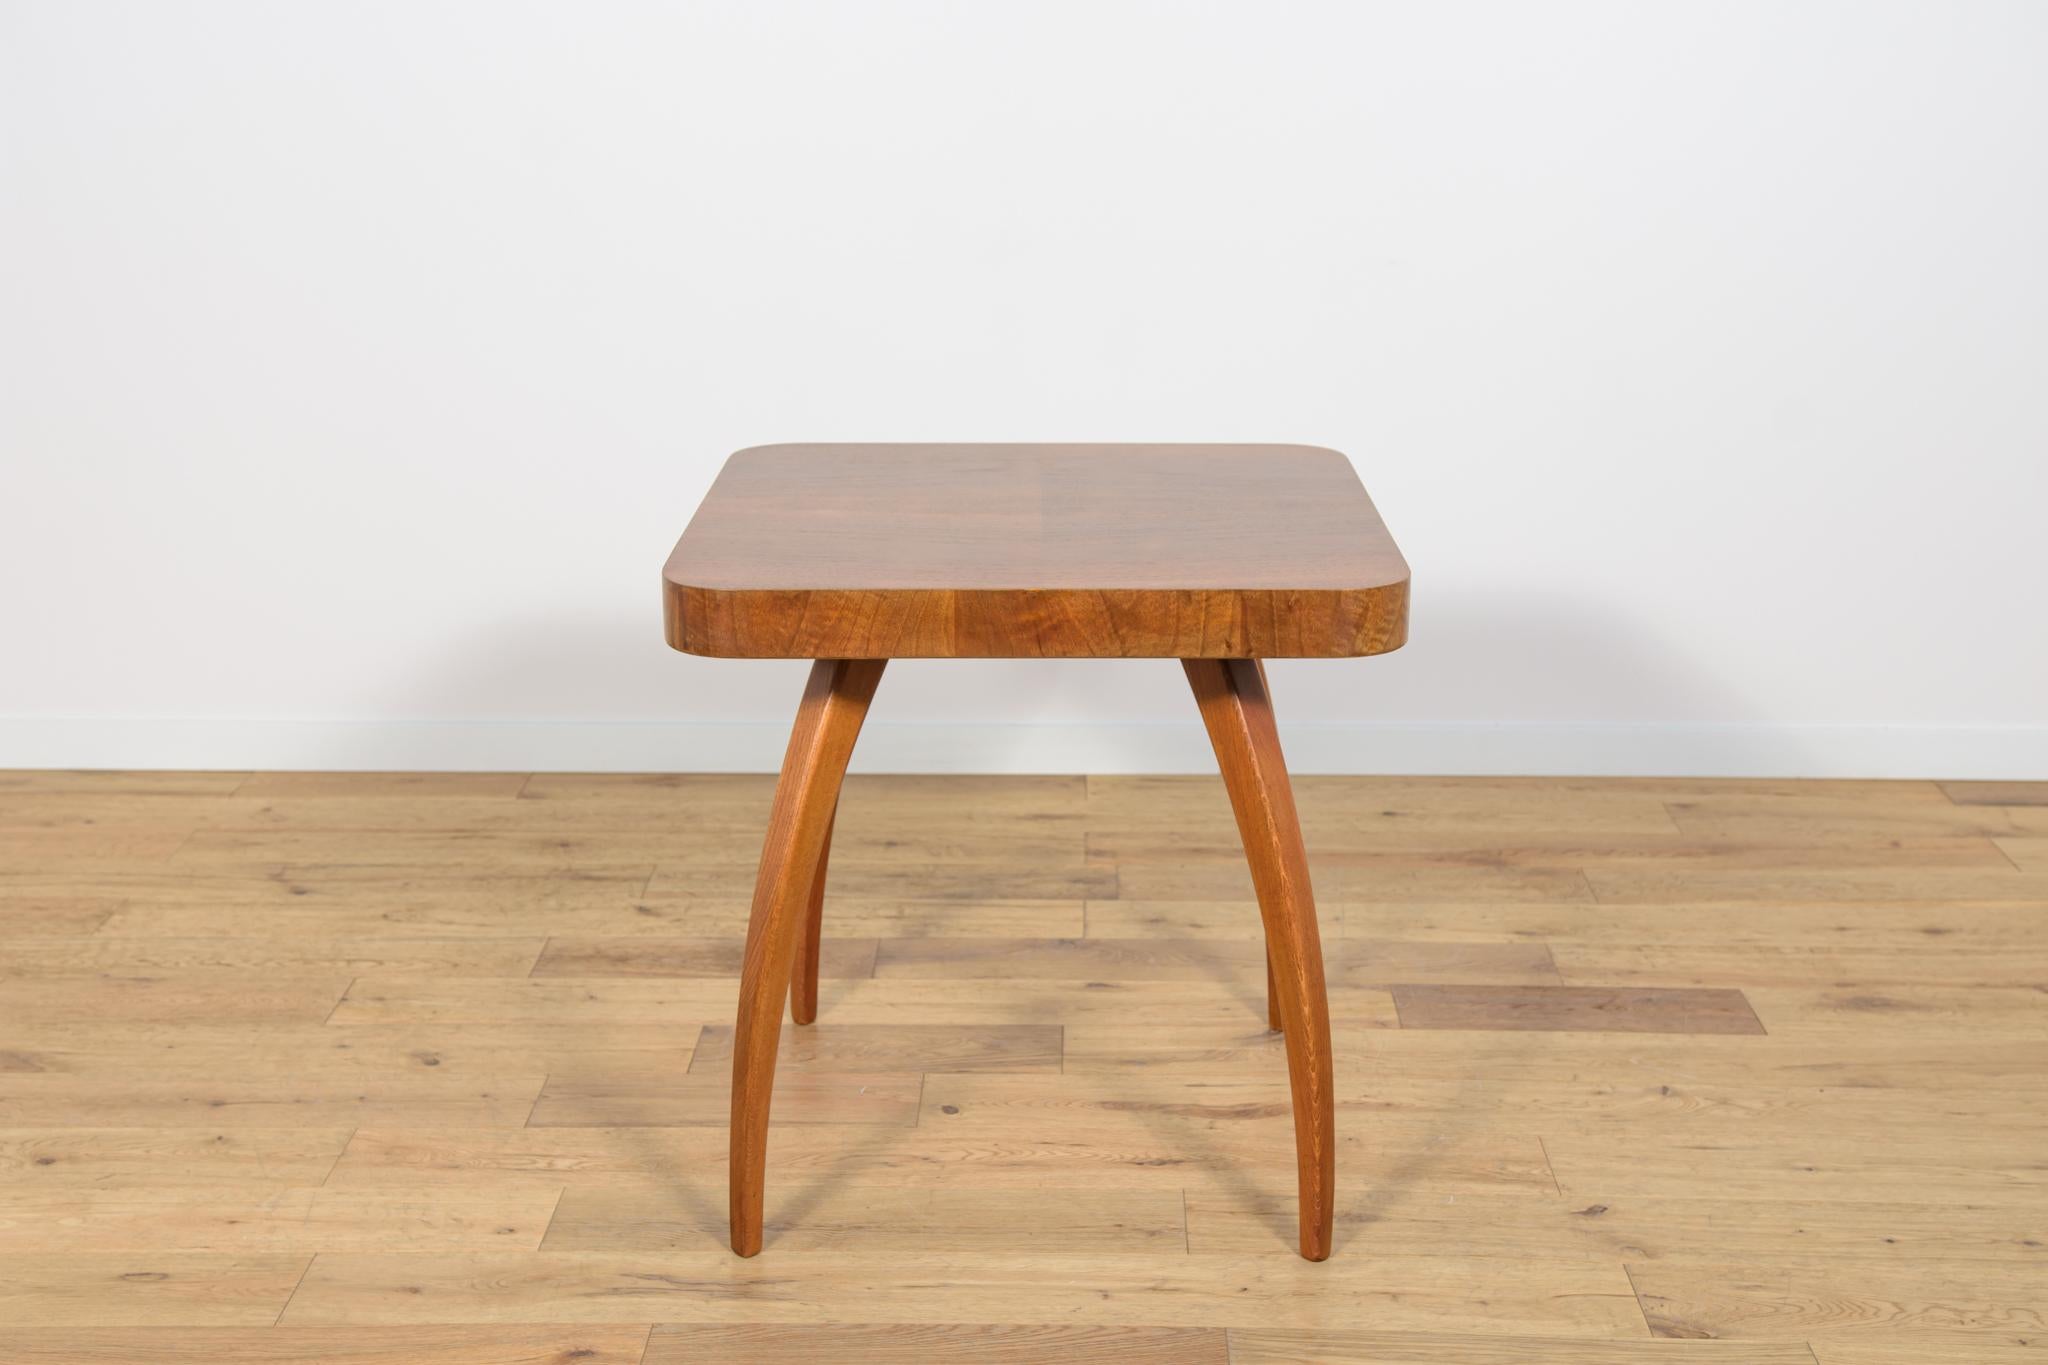 Coffee table designed by Jindřich Halabala in 1950s. It’s widely known as the “spider” table because of its shape. Jindrich Halabala helped create a new mass-market approach to home design and furnishing in Czechoslovakia in the interwar period and